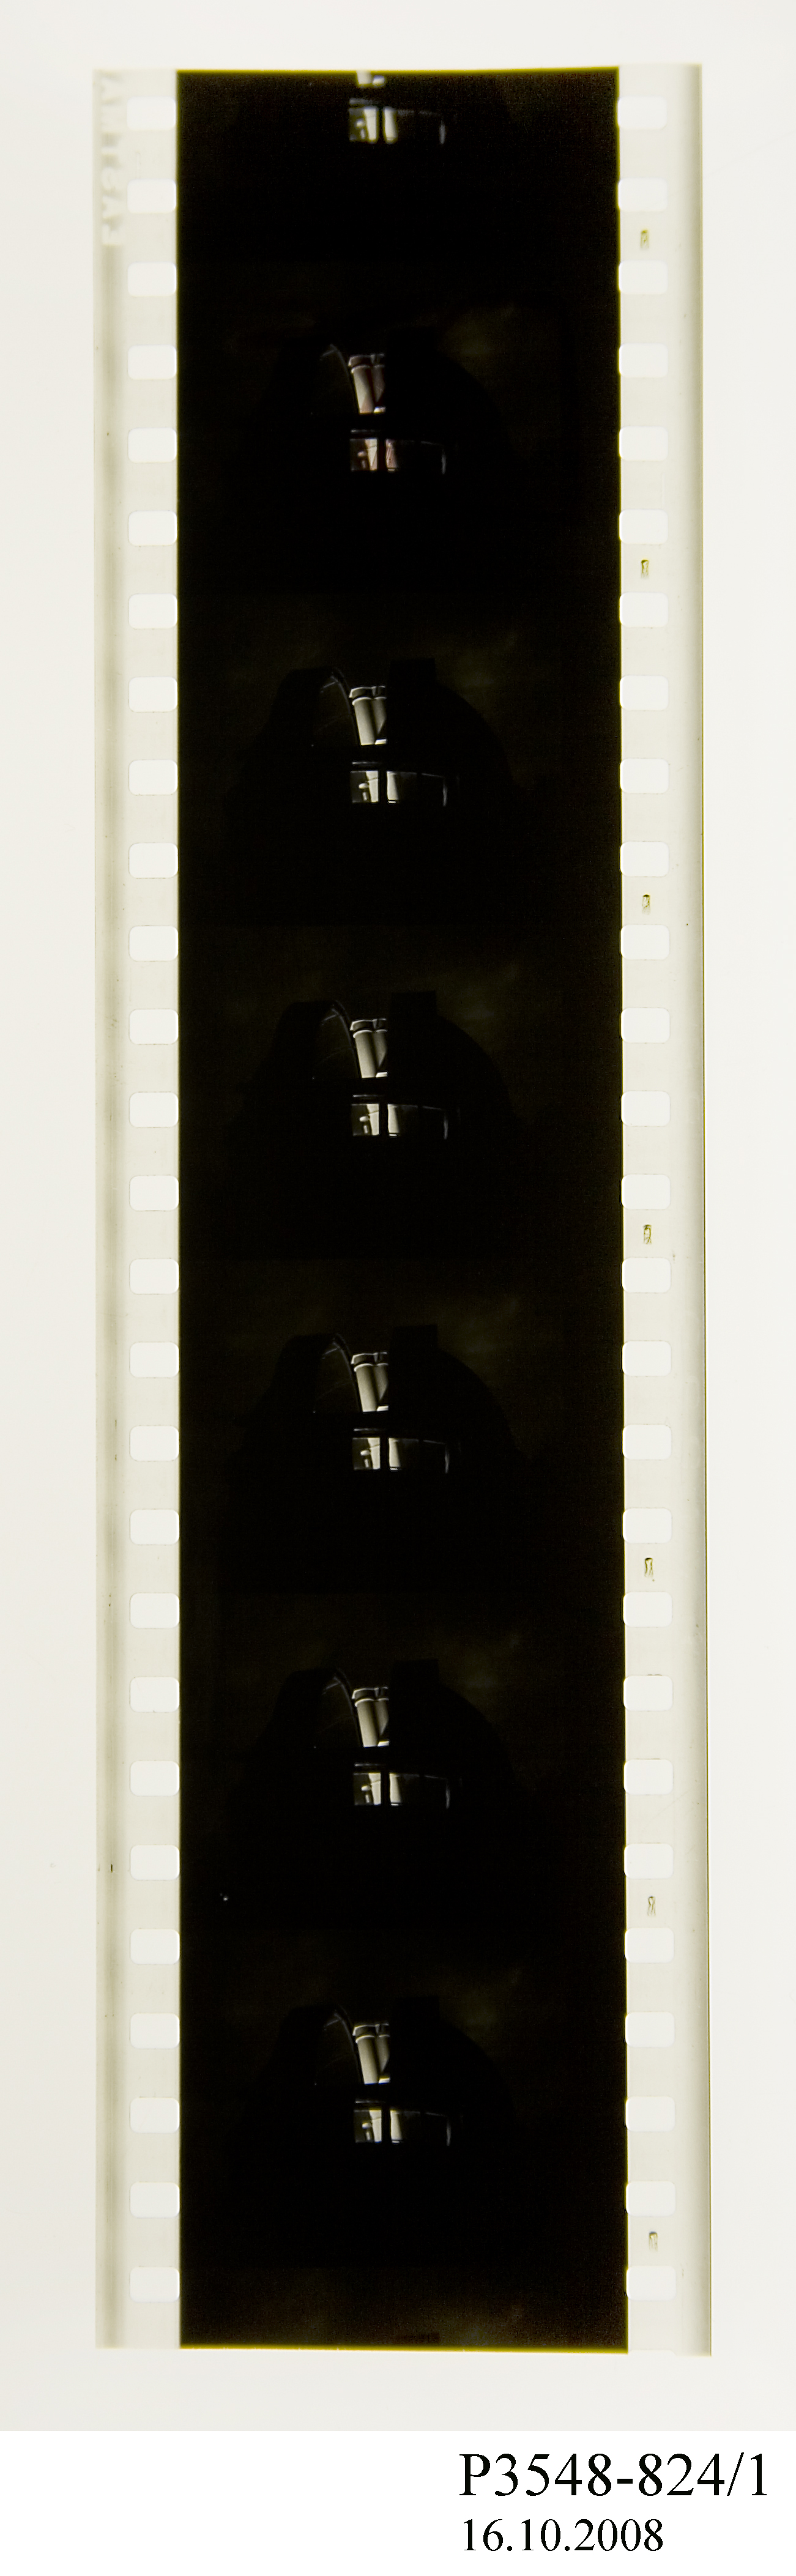 Film strip showing details of a telescope